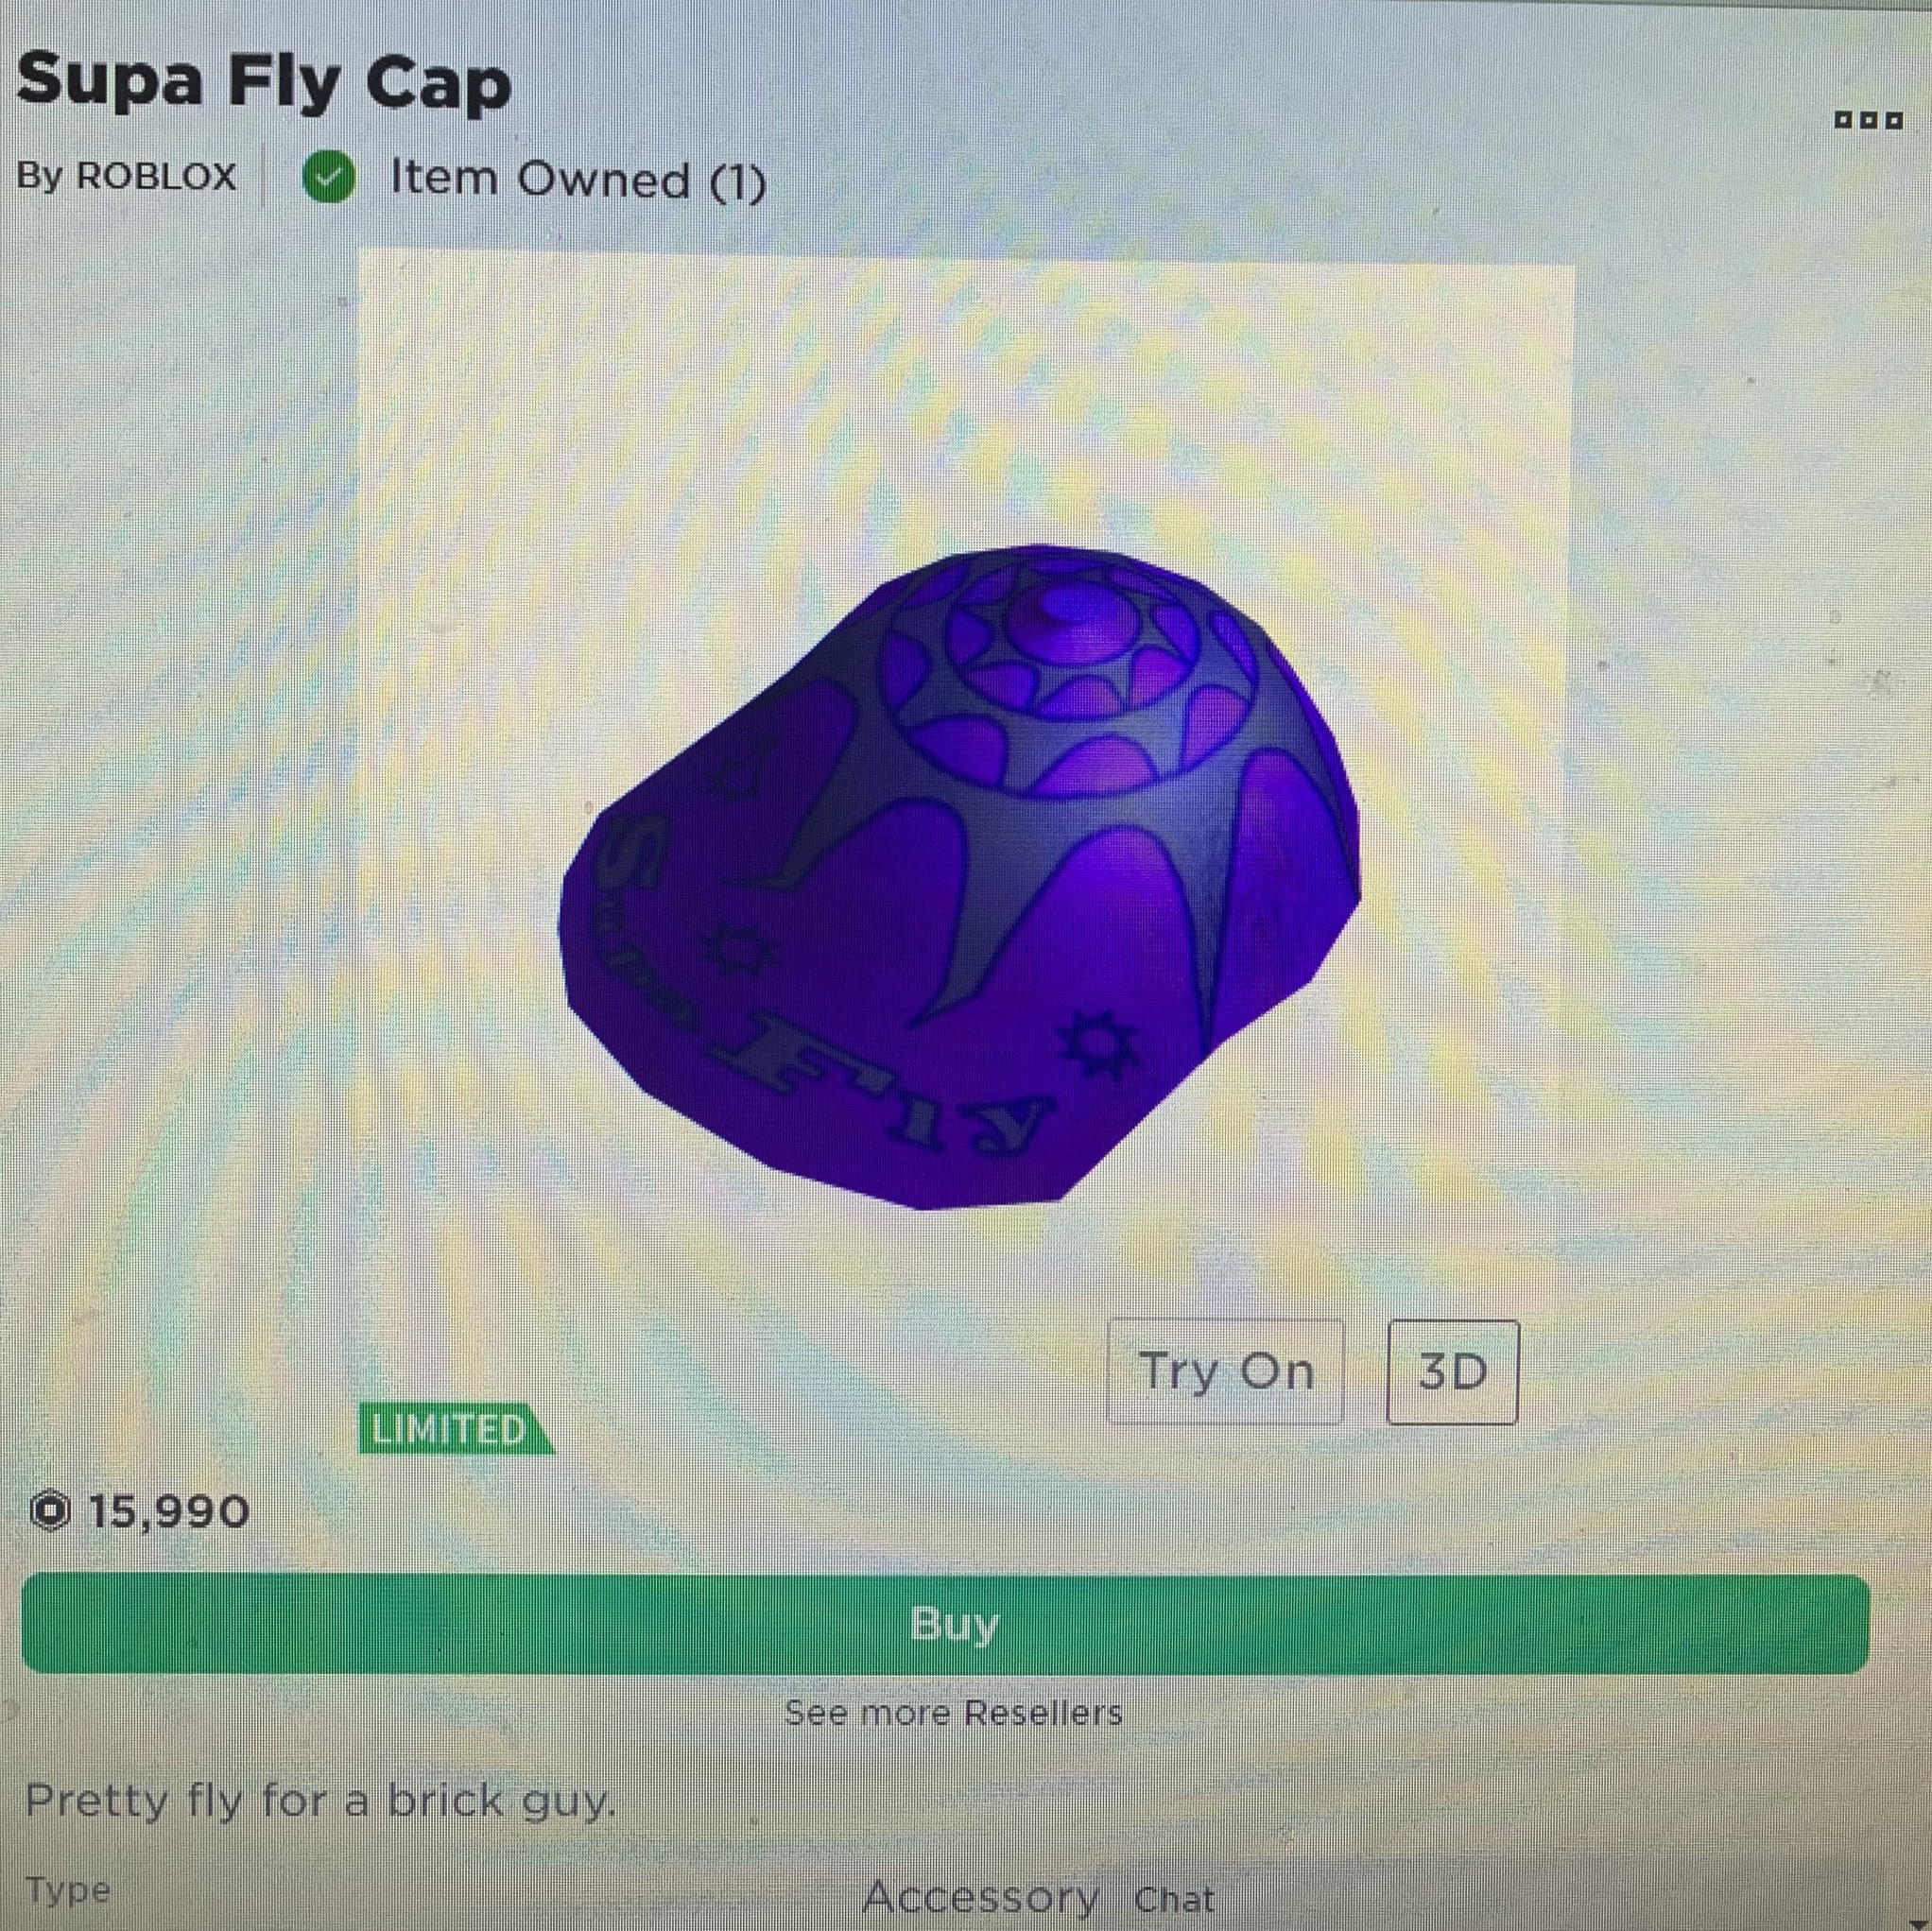 Limited Supa Fly Cap In Game Items Gameflip - roblox limited items marketplace